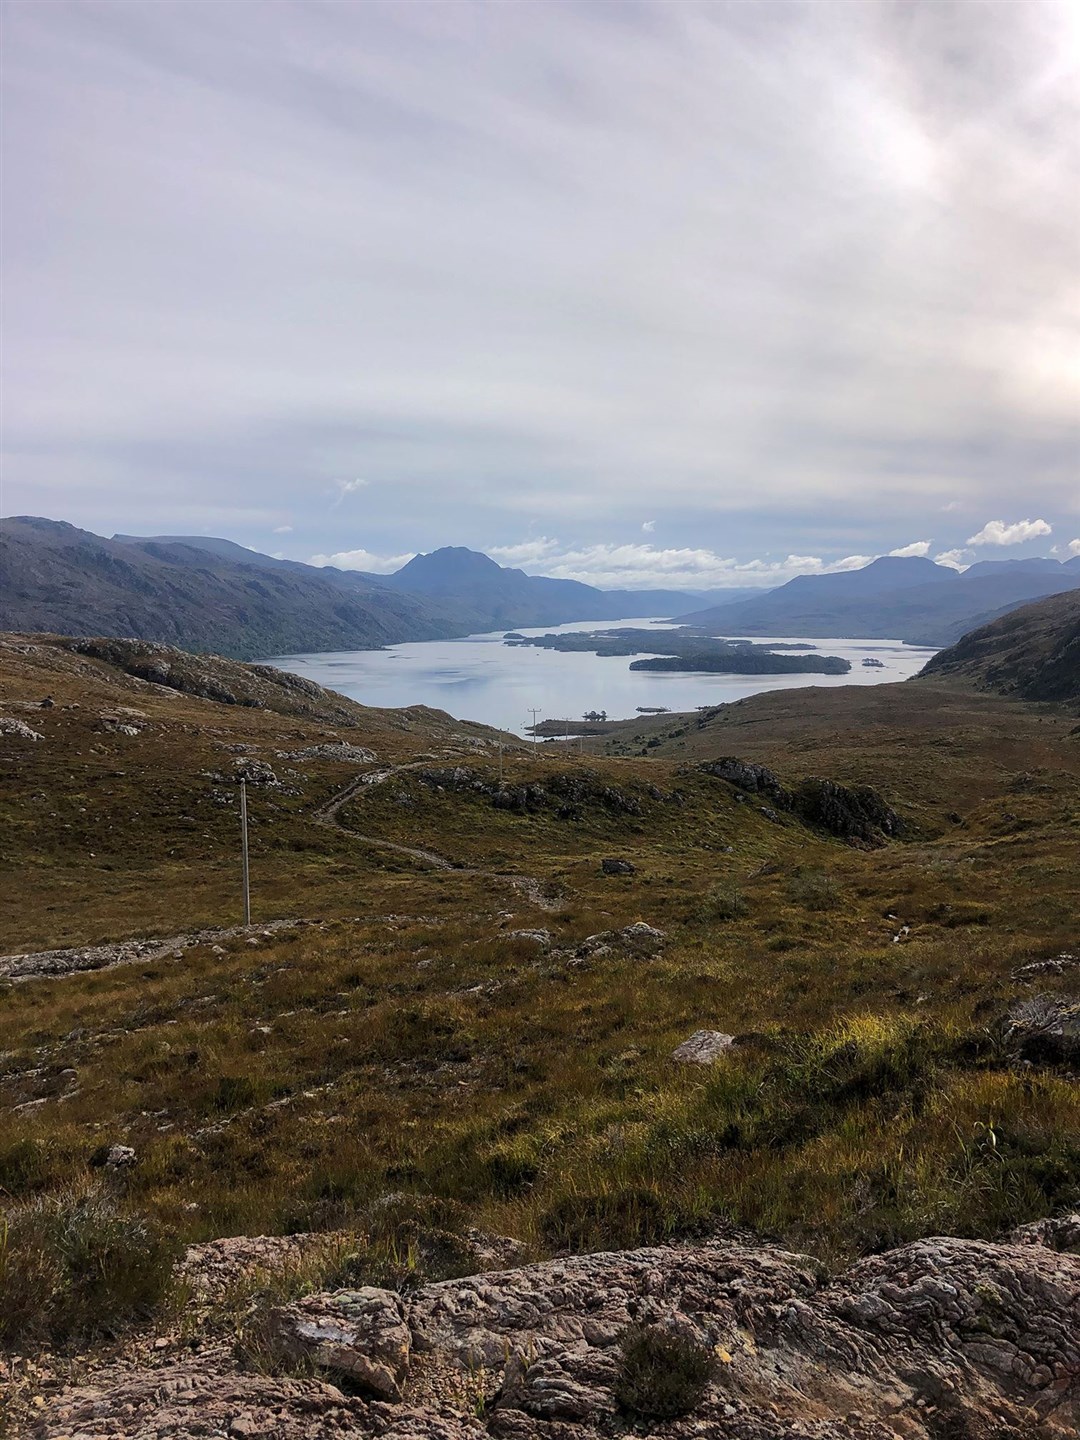 SSEN’s electricity distribution network by Loch Maree.